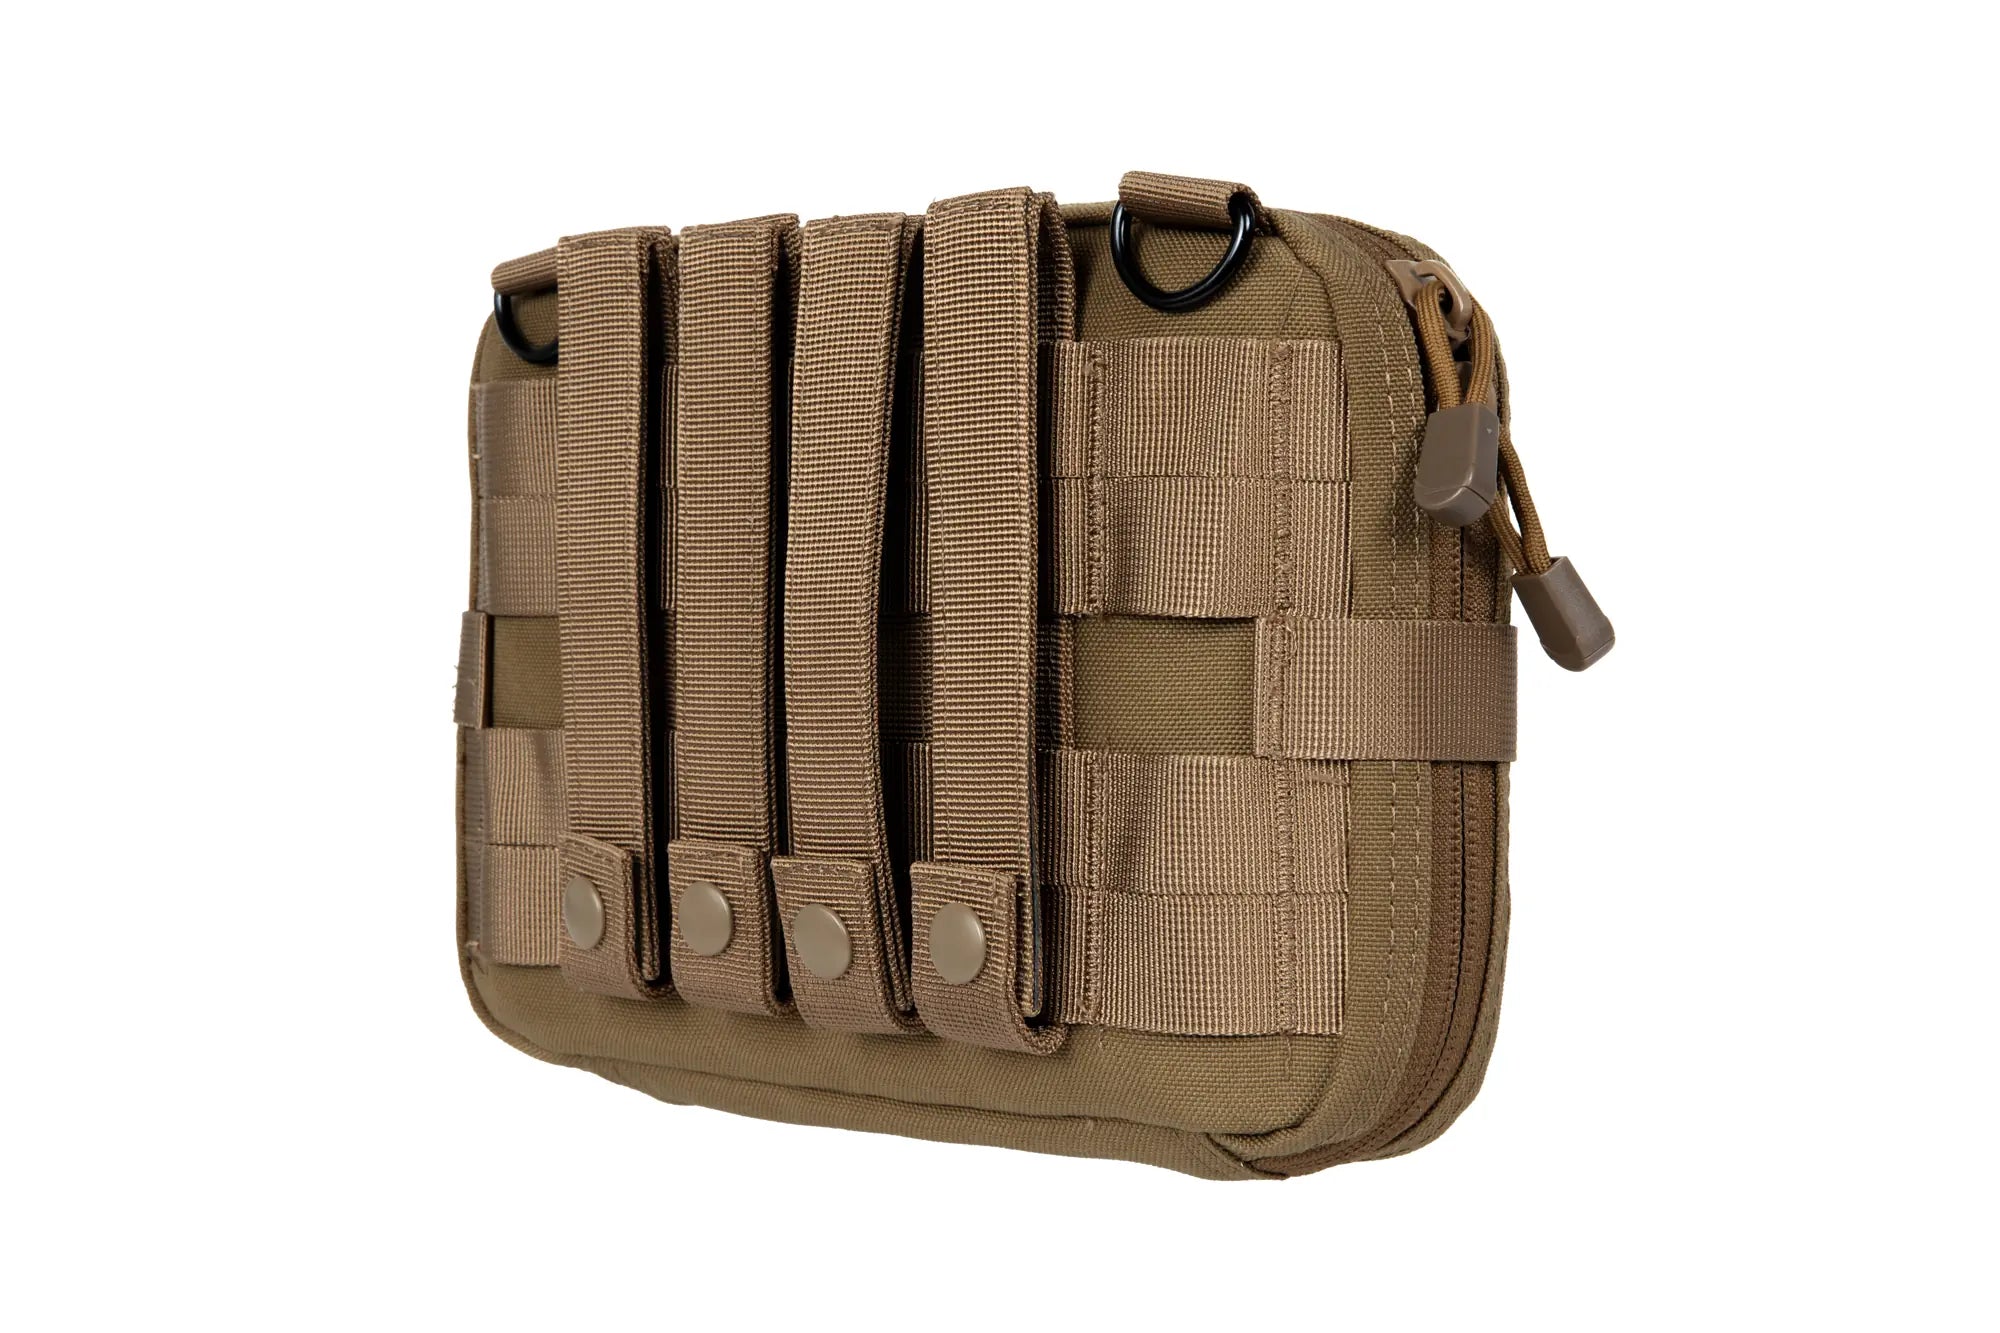 Large Administration Pouch with a Map Holder - Tan-3